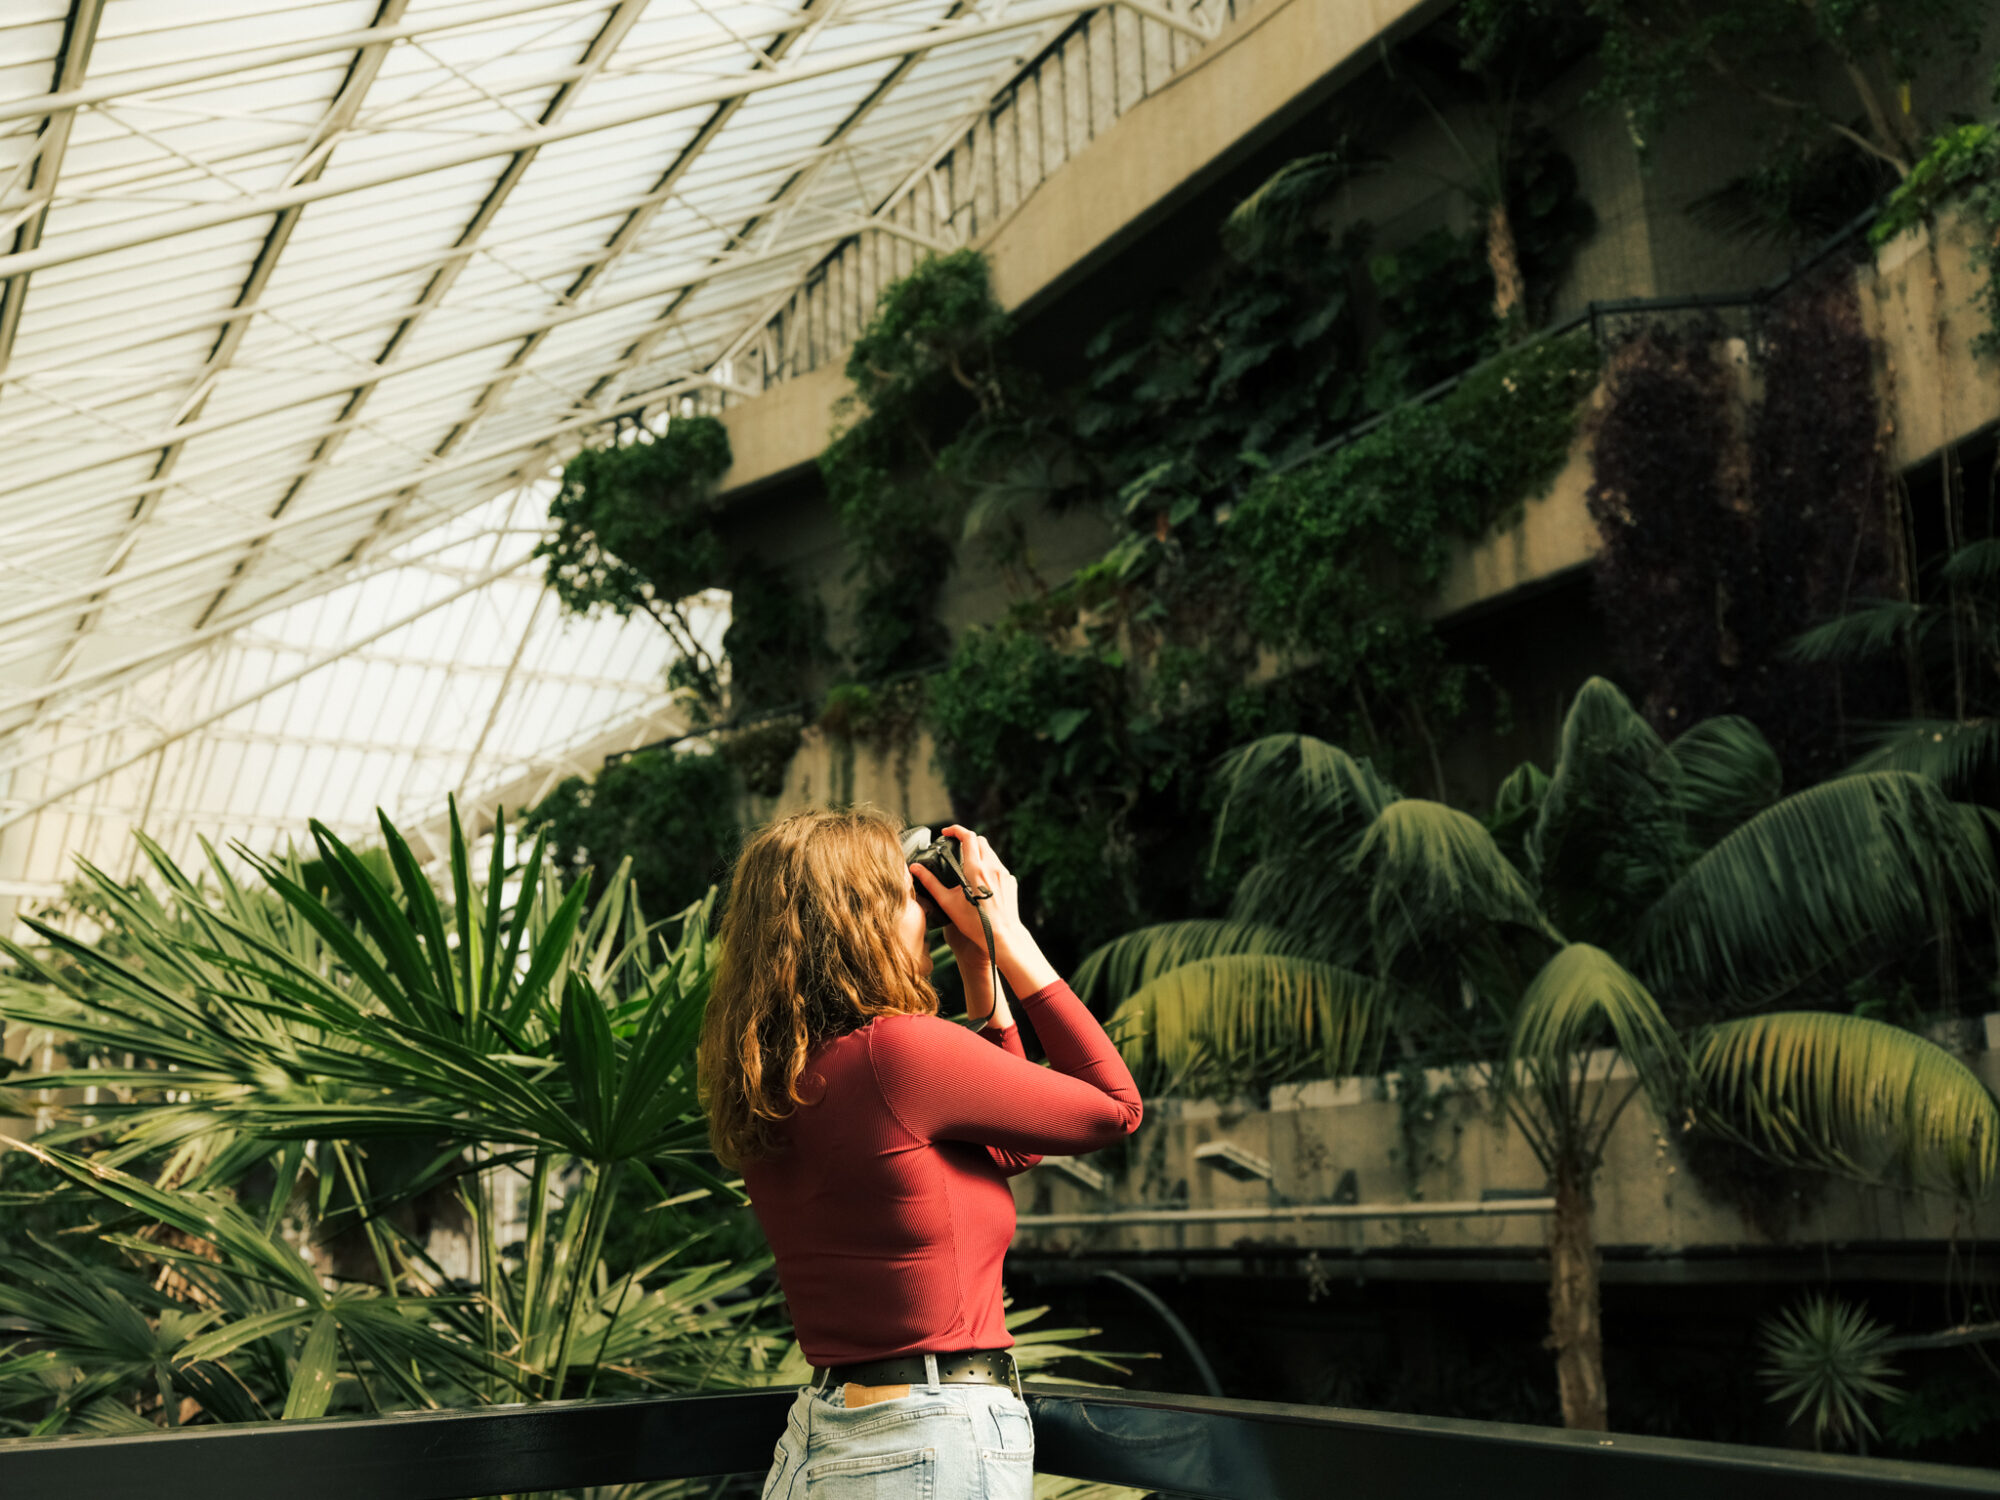 Attractions in the City of London - woman taking a picture in Barbican conservatory